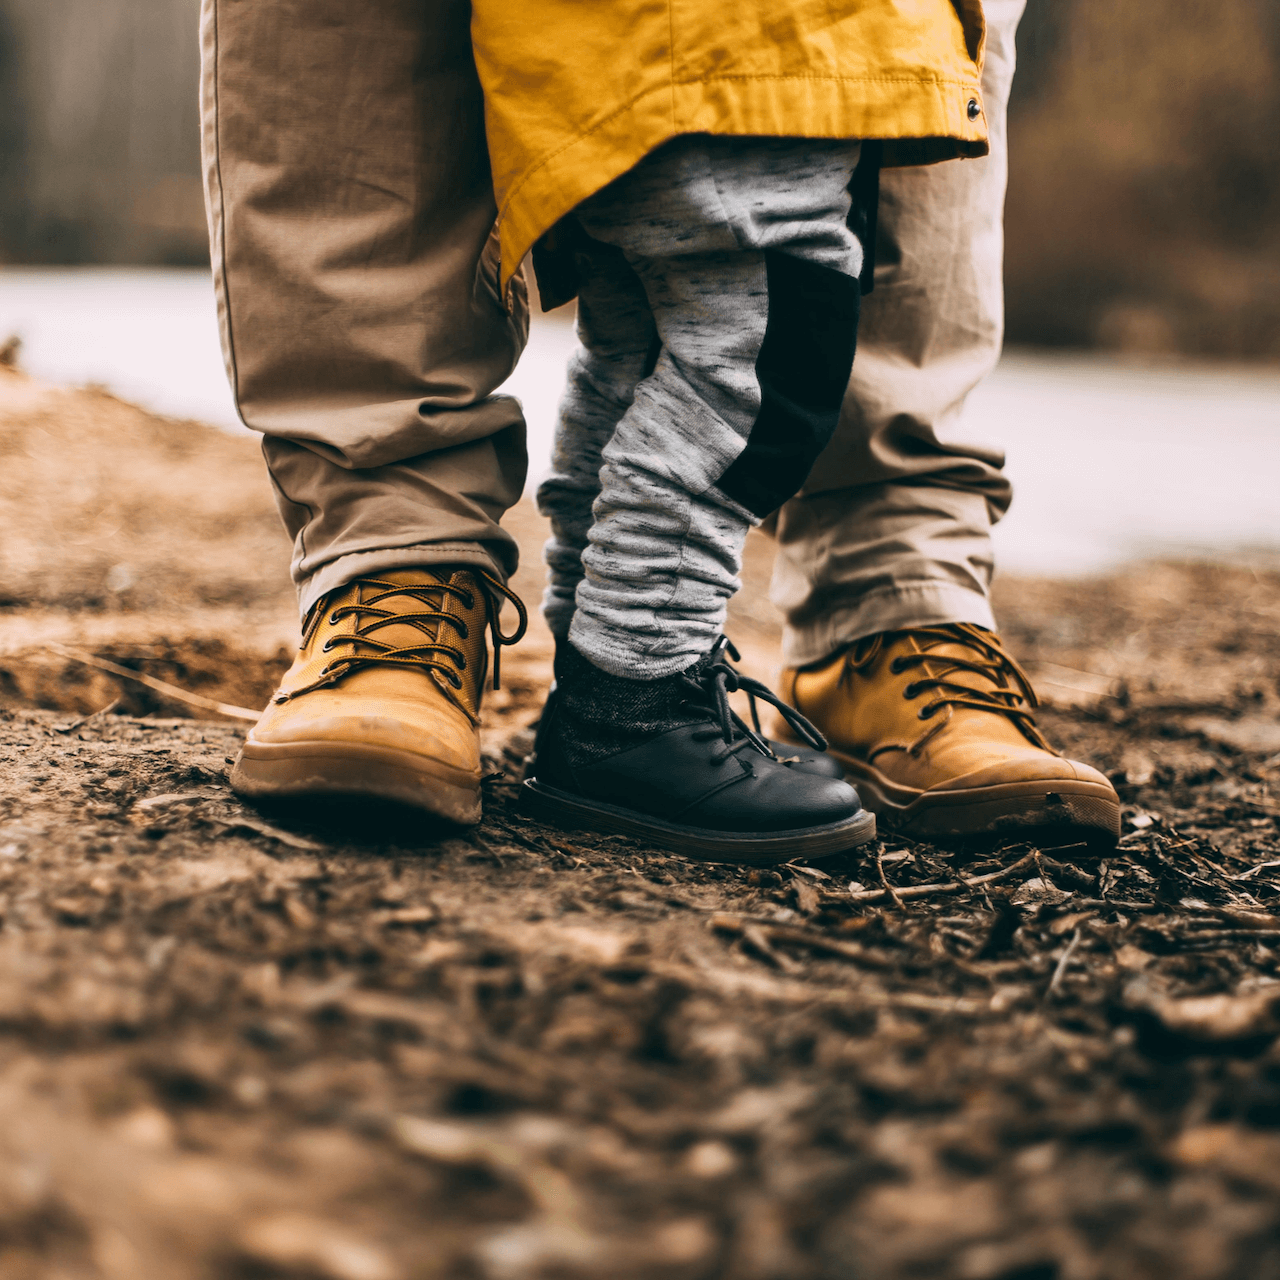 Image of feet of a father and his young son